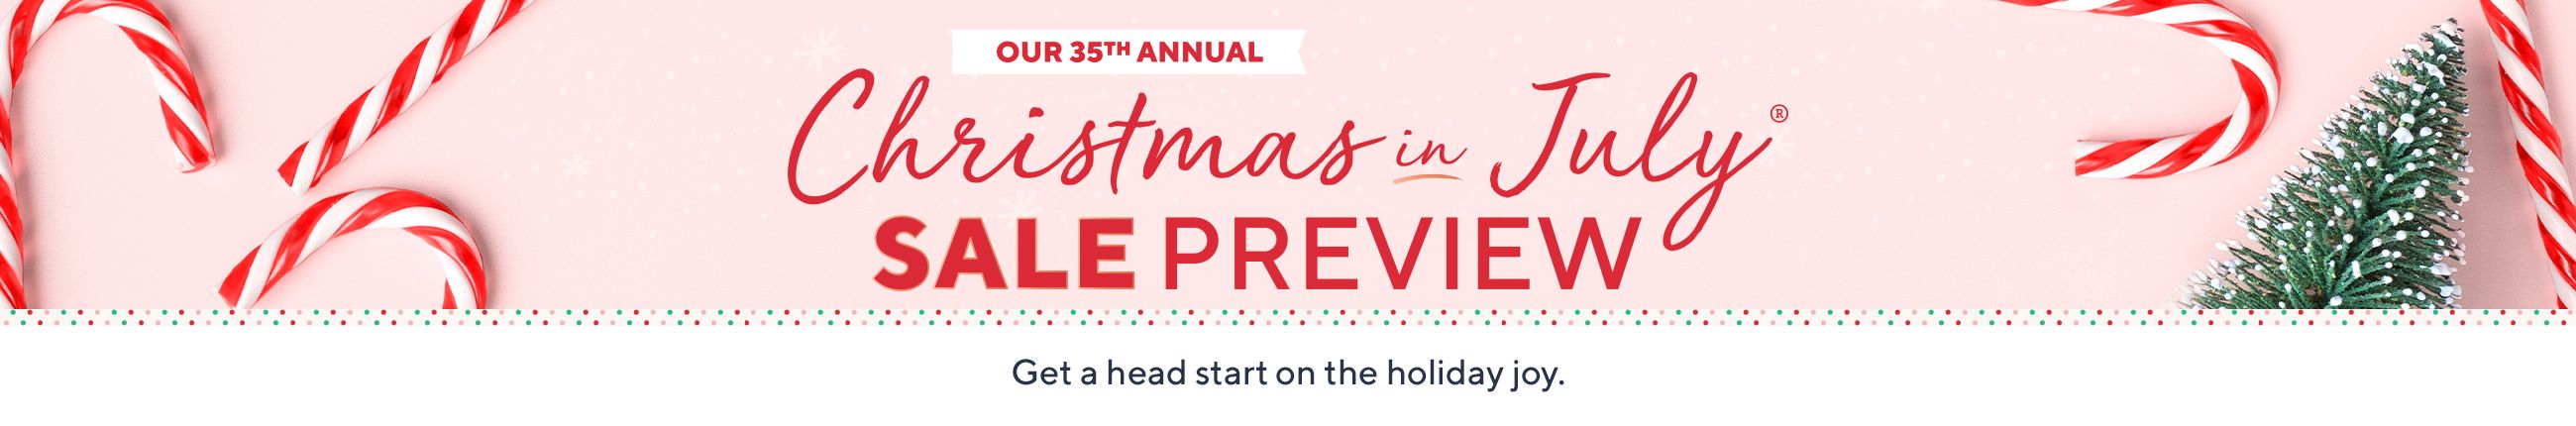 Christmas in July® Sale Preview - Get a head start on the holiday joy.